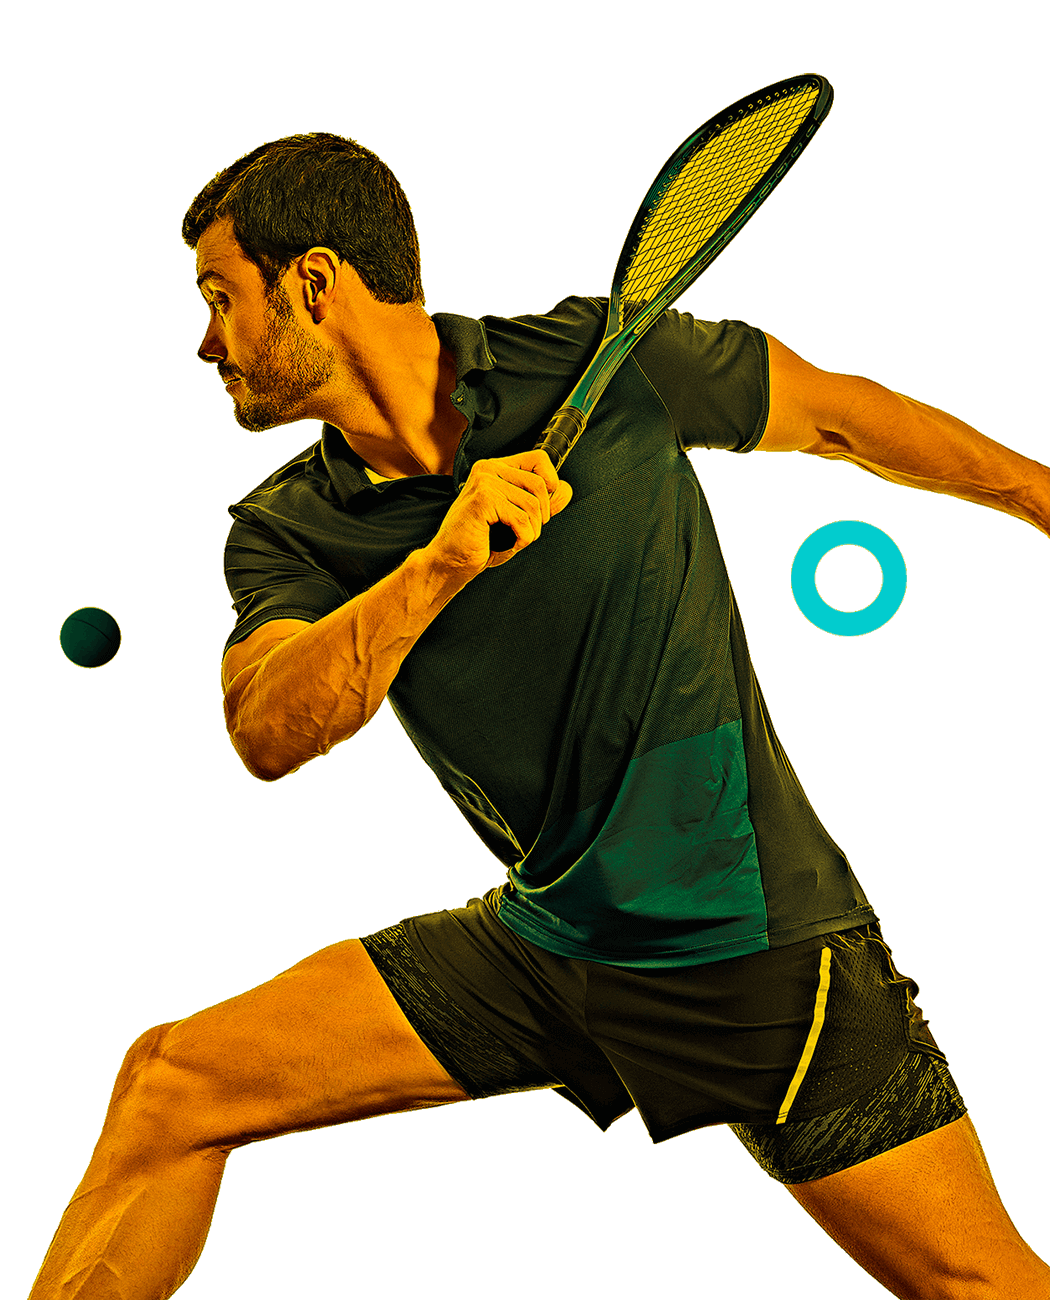 In the picture, a squash male player about to hit the ball.